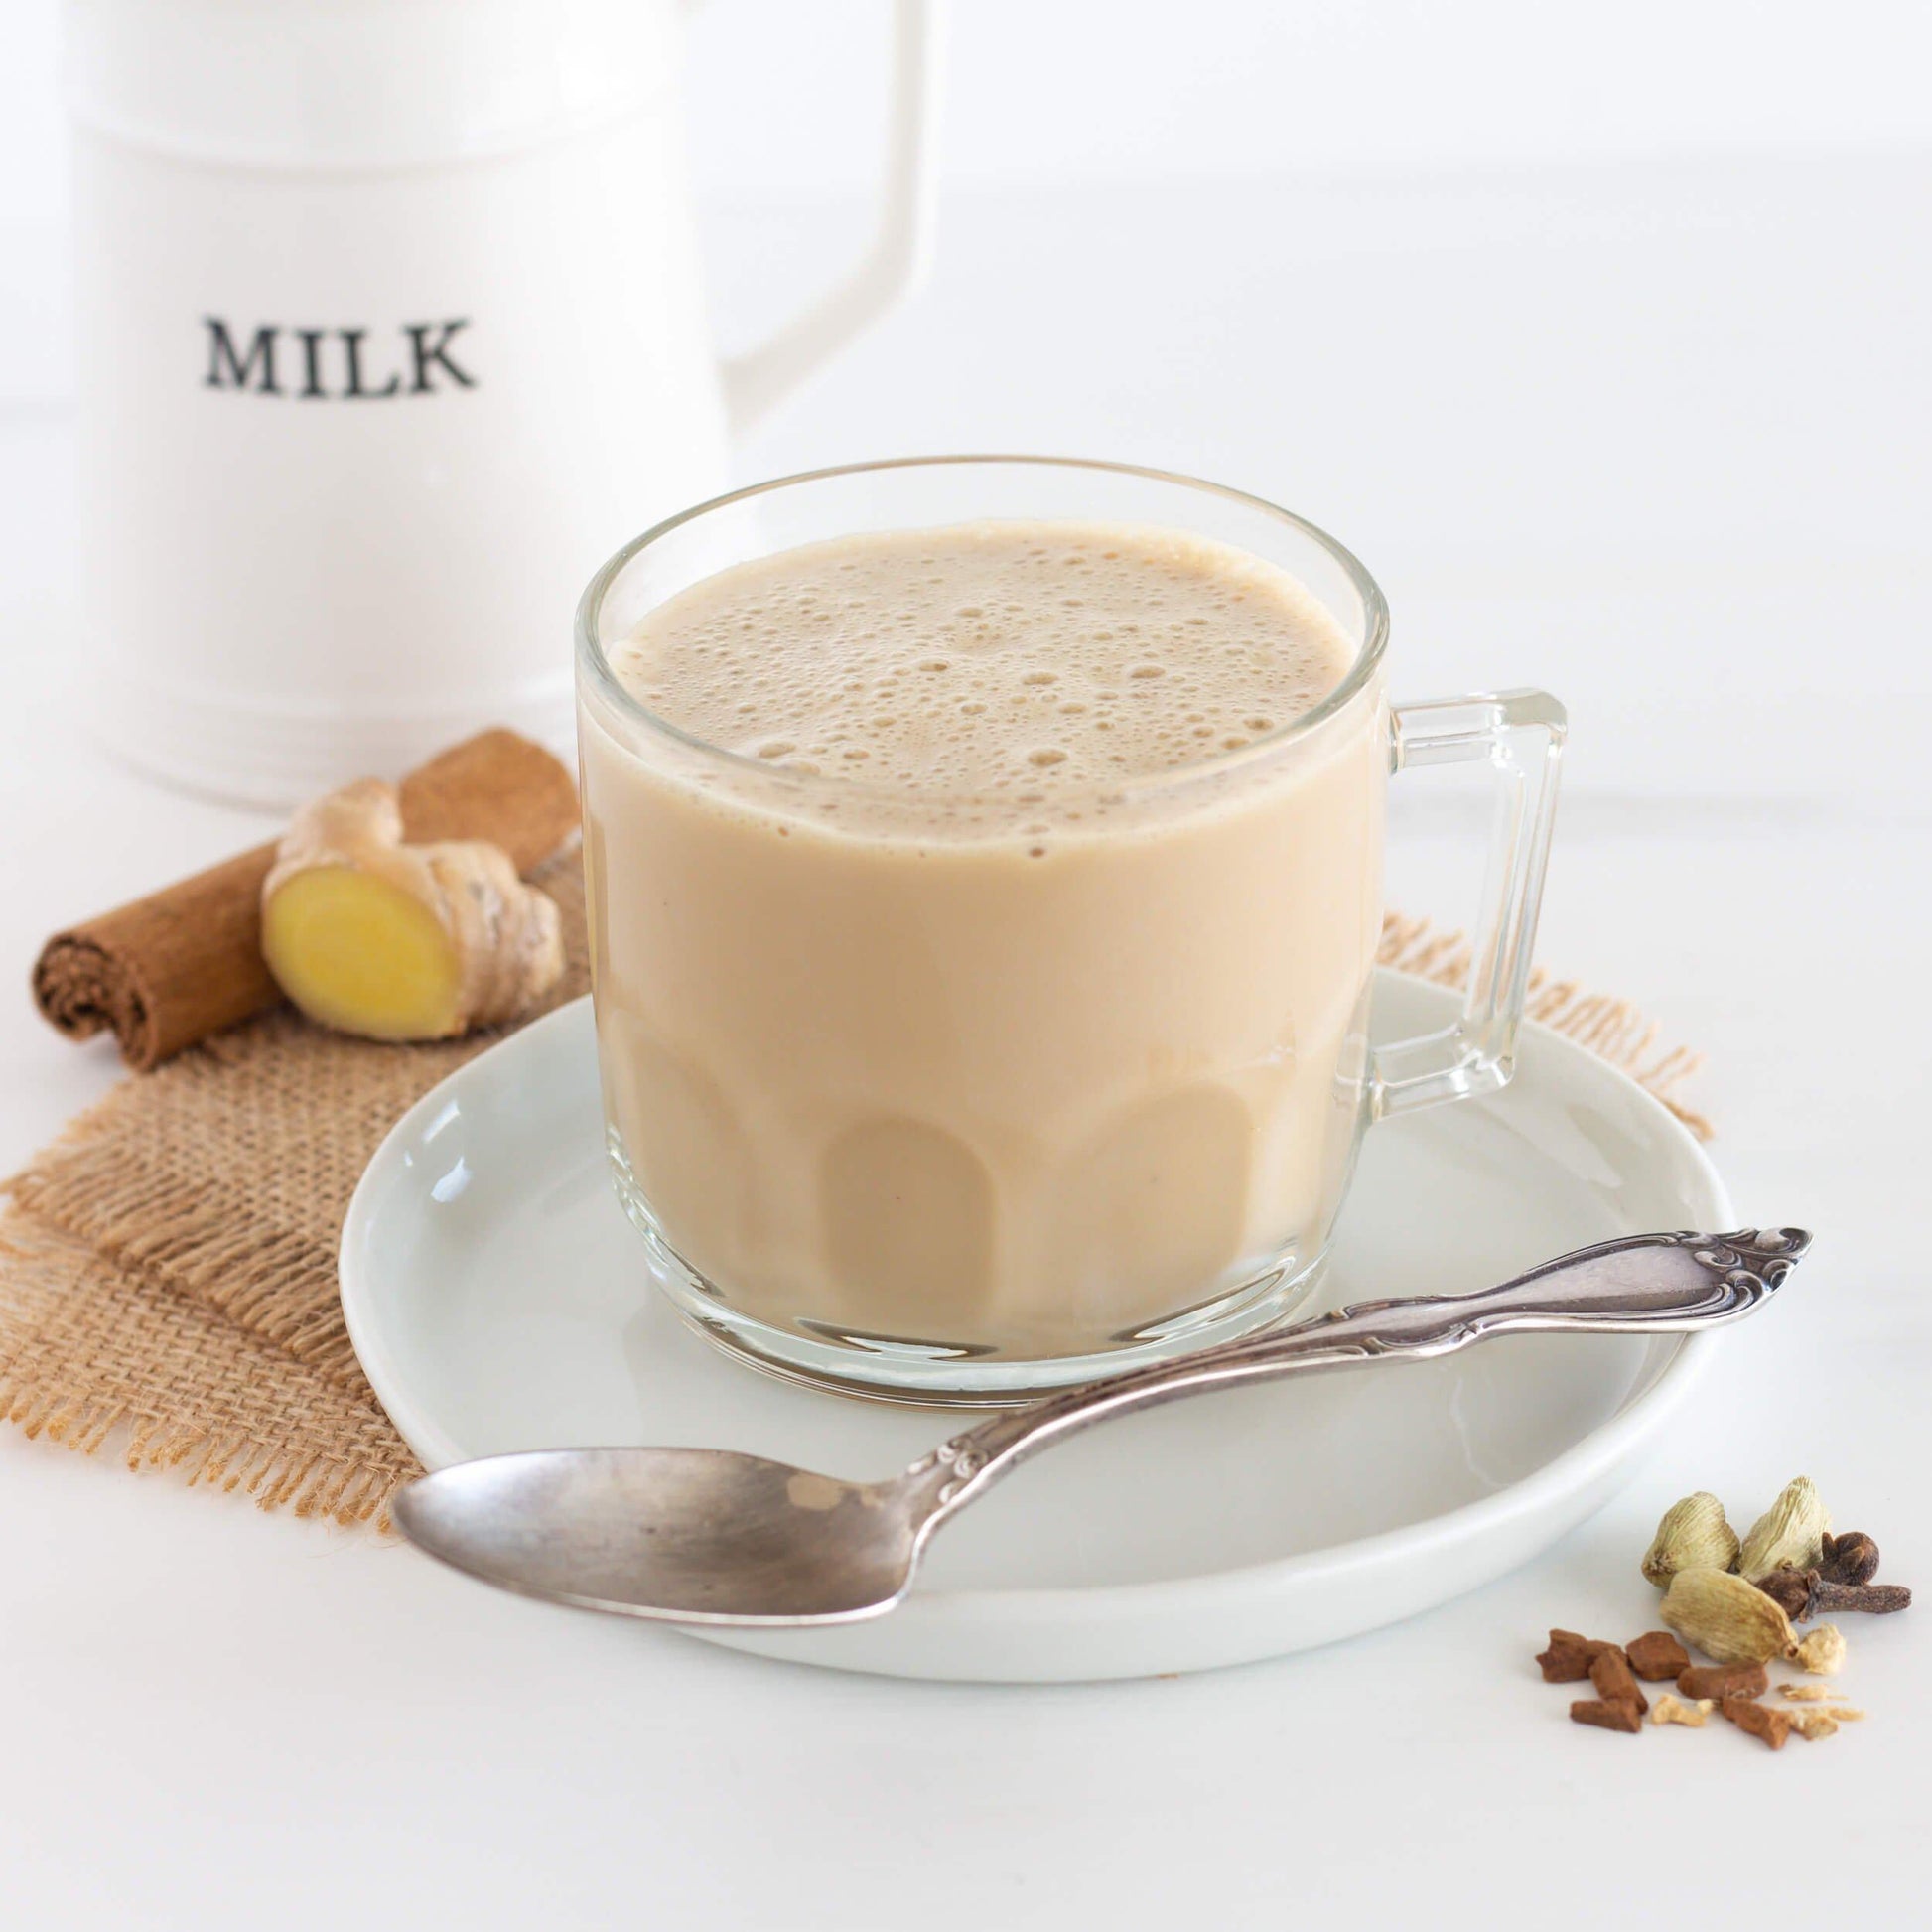 Masala Chai Black Tea shown as a milky drink in a glass mug on a white dish with a white pitcher labeled "Milk" in the background and chai spices nearby